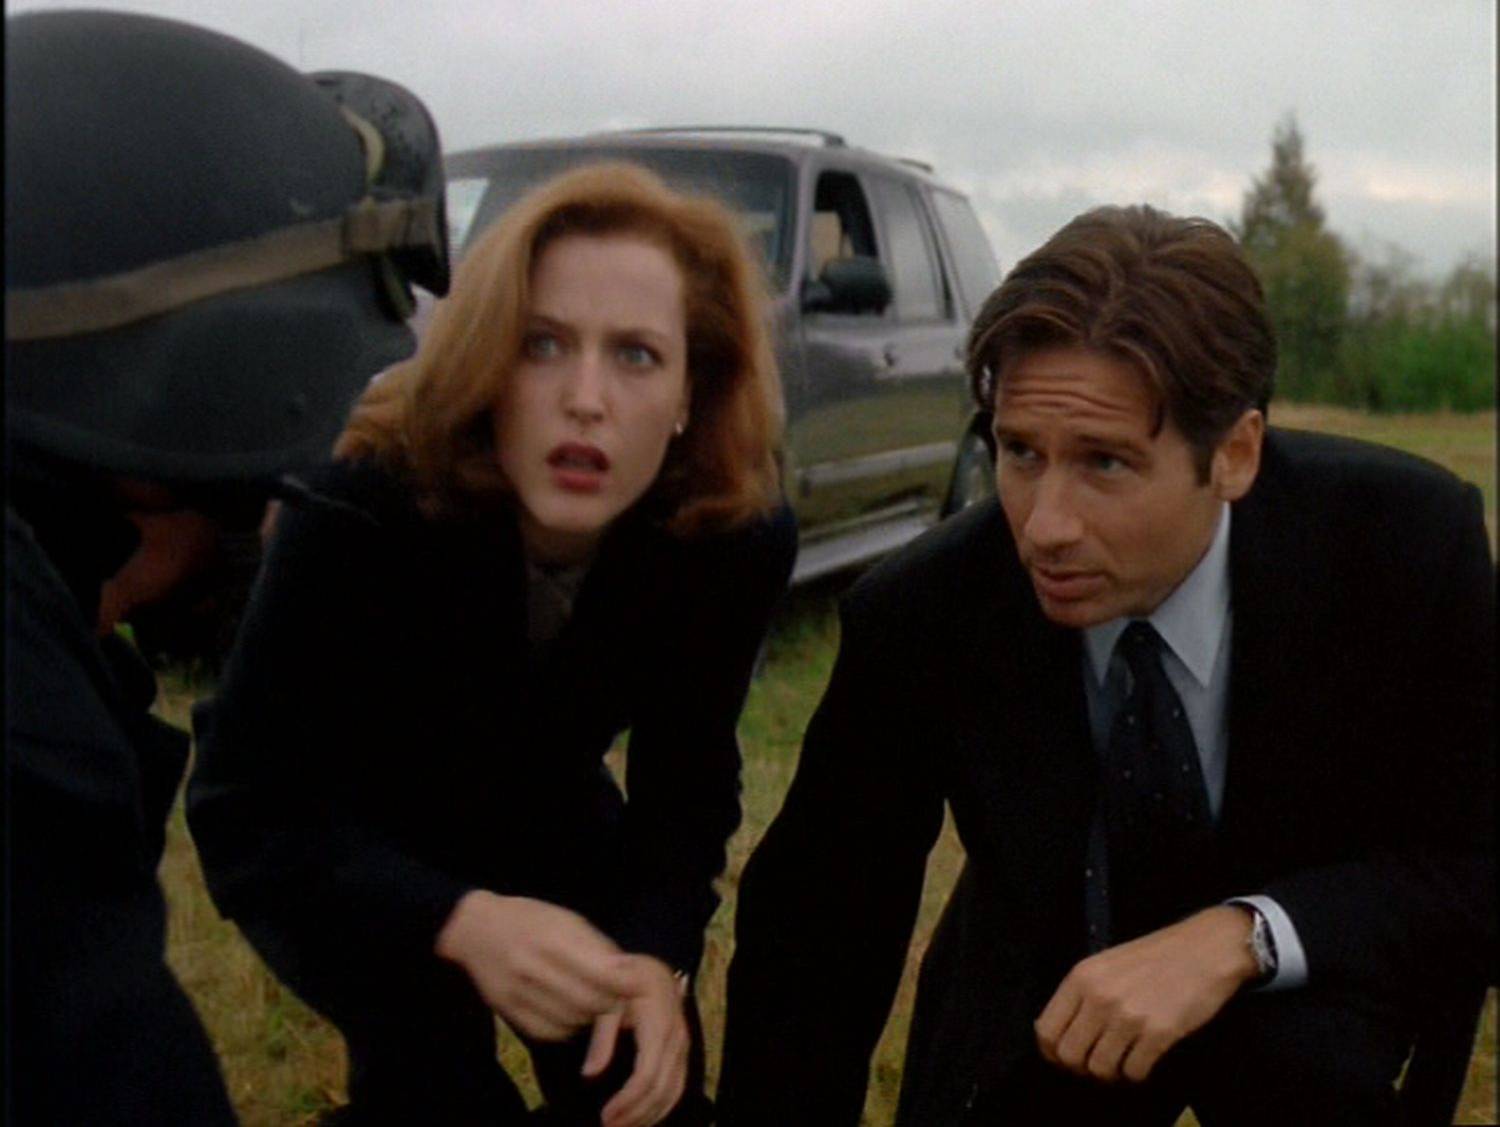 mulder-scully-in-4x05-the-field-where-i-